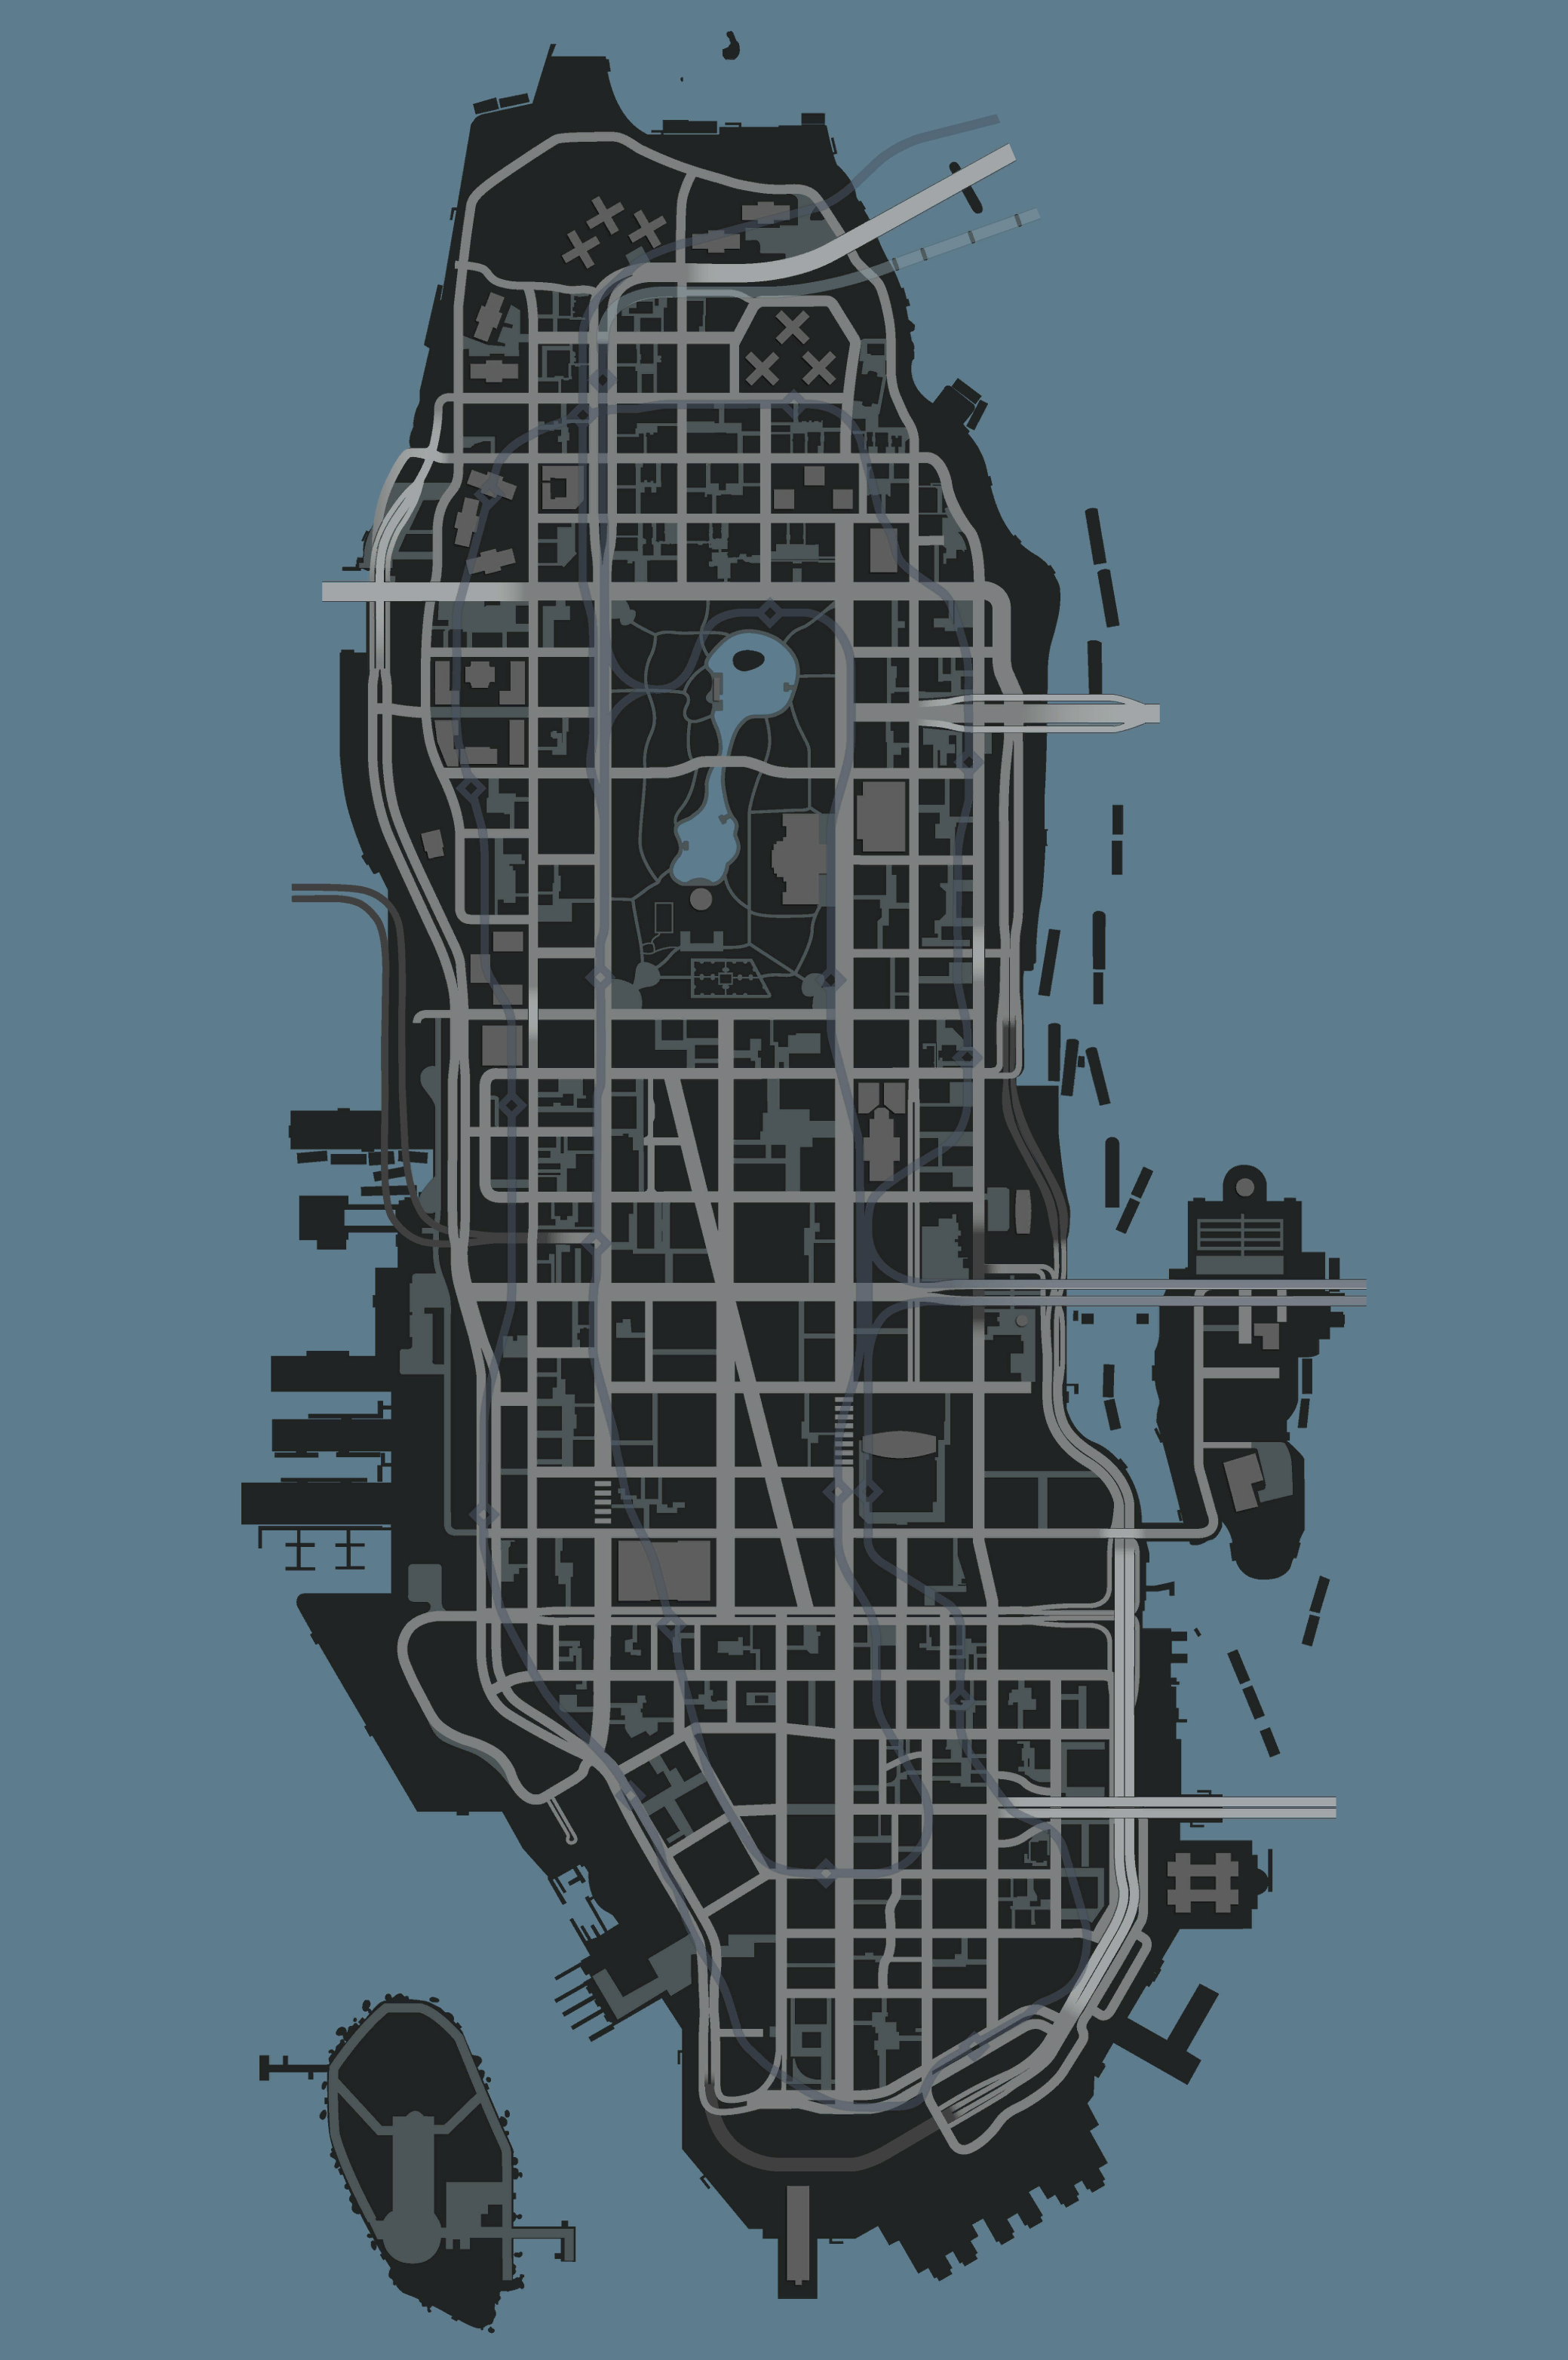 where are the atms located on the map of gta 4